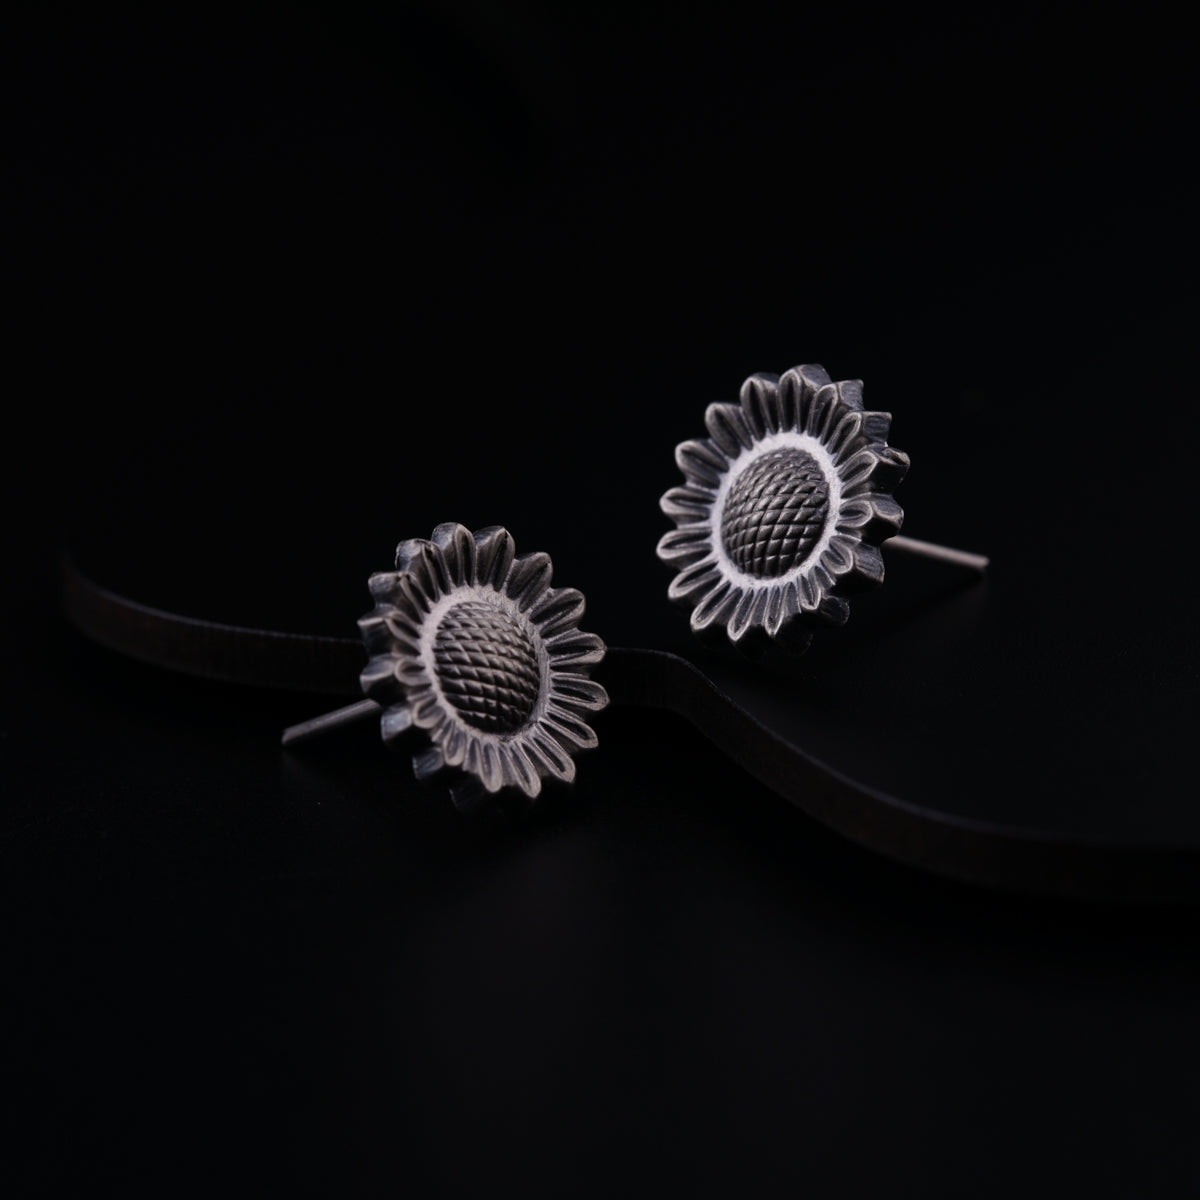 a pair of sunflower earrings on a black background